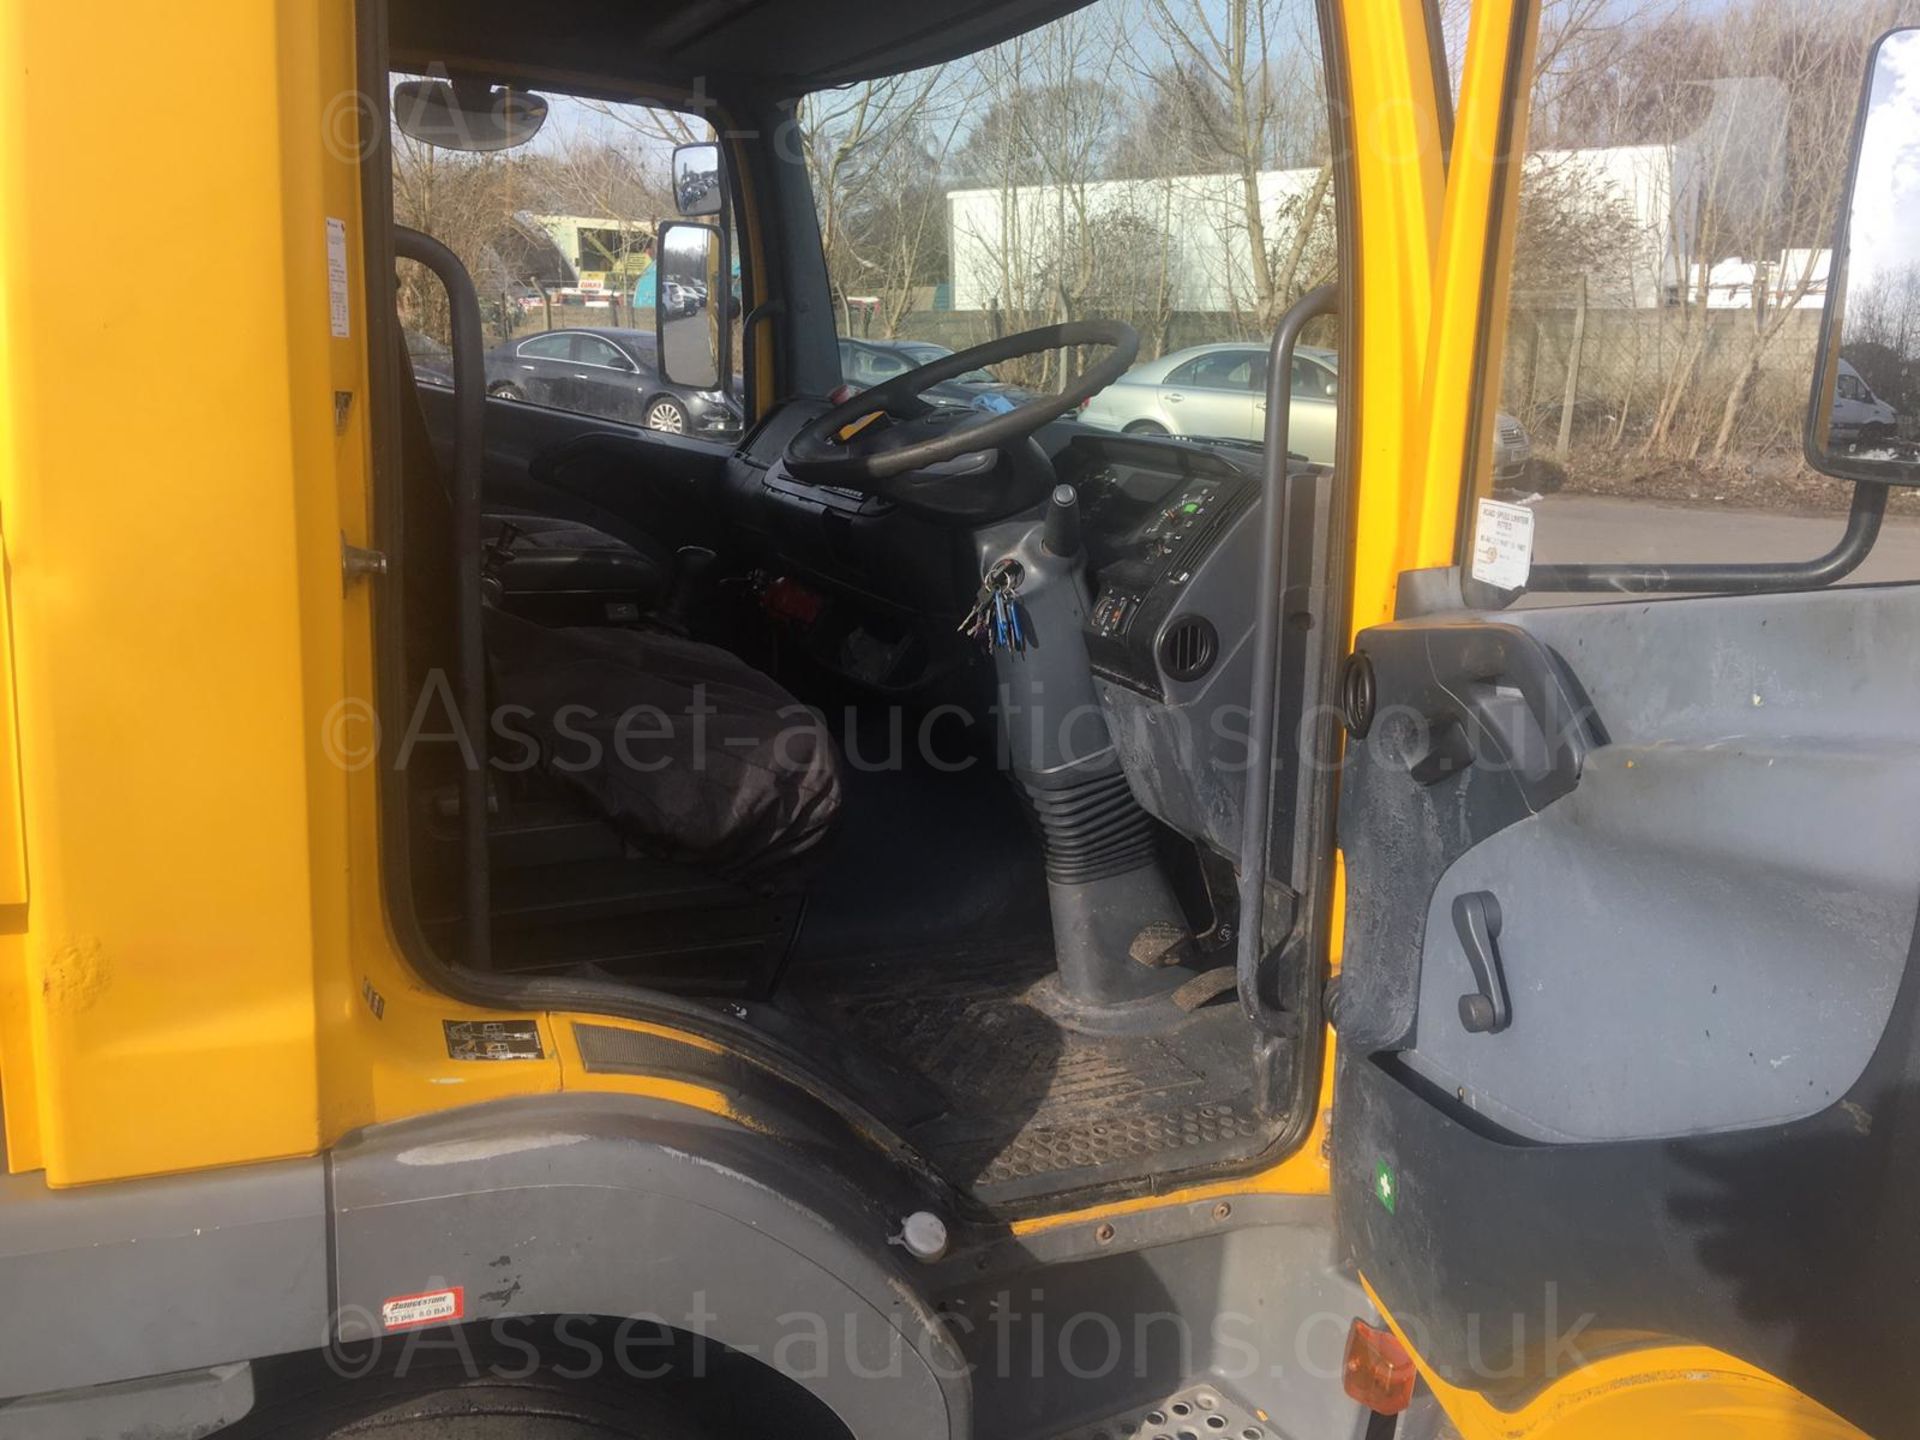 2004/54 REG MERCEDES ATEGO 1018 DAY YELLOW DROPSIDE LINE PAINTING LORRY 4.3L DIESEL ENGINE *NO VAT* - Image 30 of 62